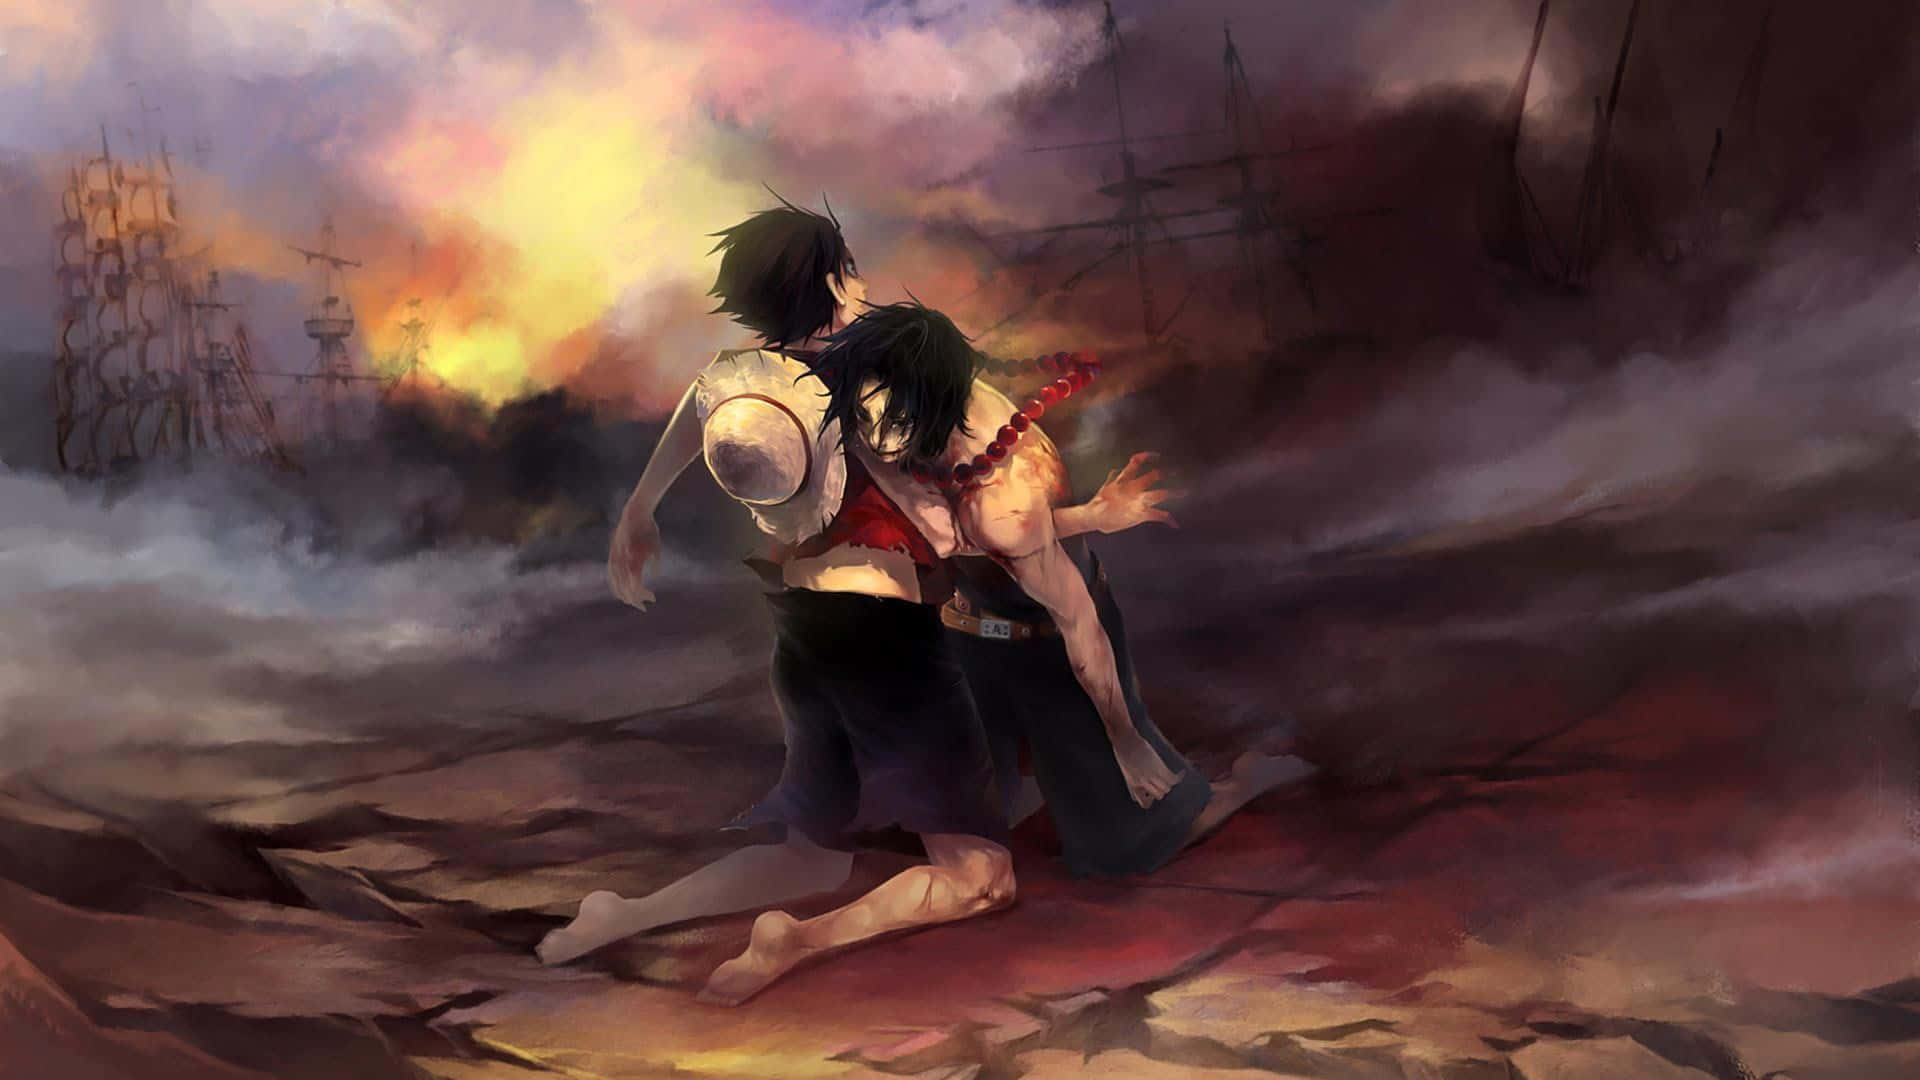 One Piece - The Heartbreaking Moment of Ace's Death Wallpaper